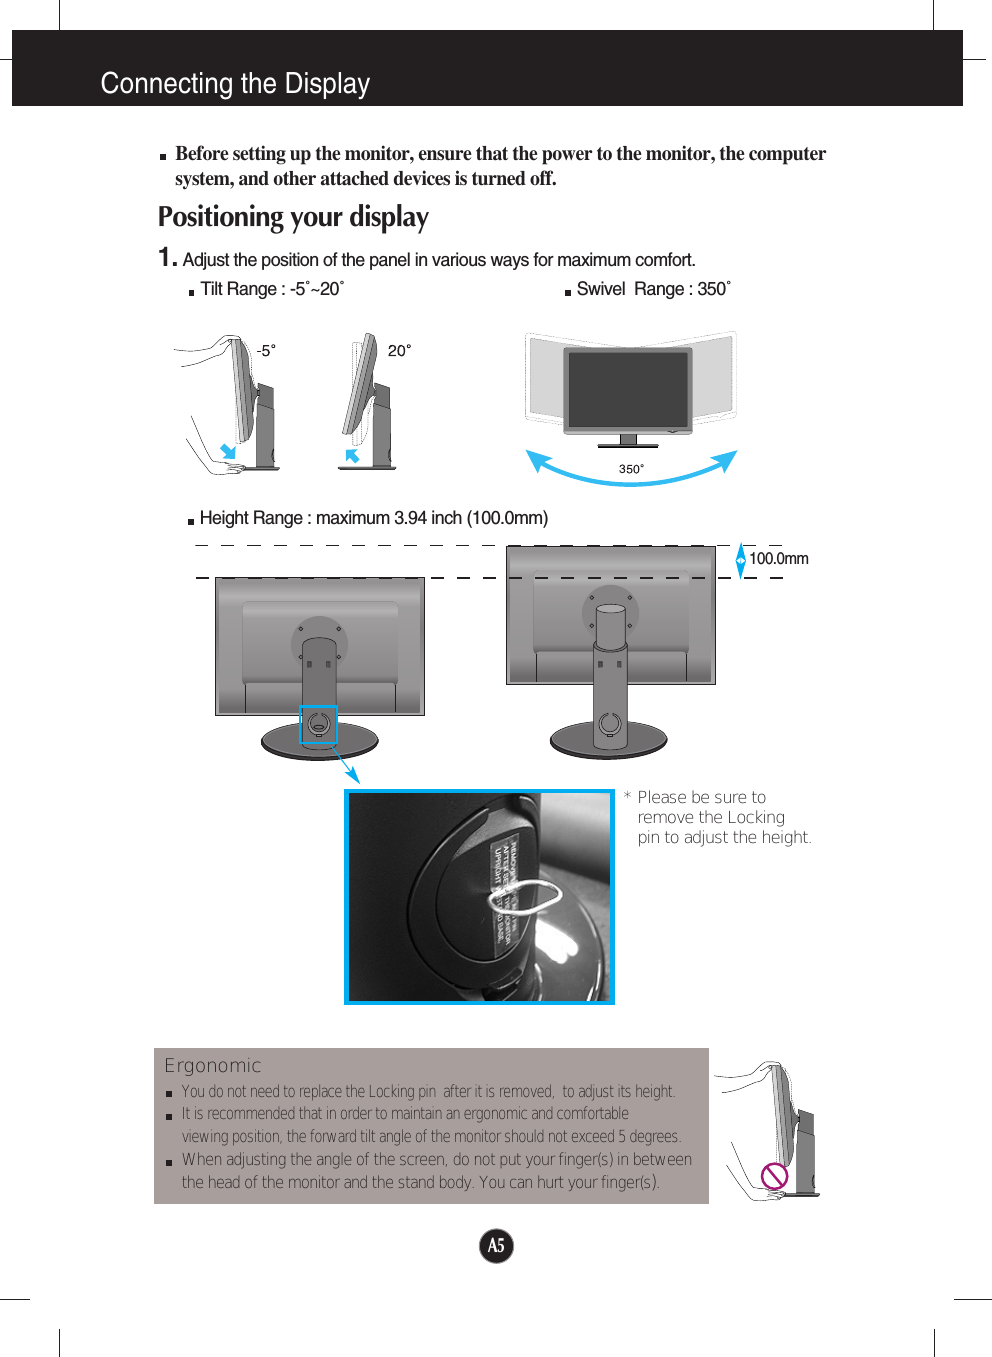 100.0mmA5Connecting the DisplayBefore setting up the monitor, ensure that the power to the monitor, the computersystem, and other attached devices is turned off. Positioning your display1. Adjust the position of the panel in various ways for maximum comfort.Tilt Range : -5˚~20˚                                                  Swivel  Range : 350˚ErgonomicYou do not need to replace the Locking pin  after it is removed,  to adjust its height. It is recommended that in order to maintain an ergonomic and comfortable viewing position, the forward tilt angle of the monitor should not exceed 5 degrees.When adjusting the angle of the screen, do not put your finger(s) in between the head of the monitor and the stand body. You can hurt your finger(s).Height Range : maximum 3.94 inch (100.0mm)* Please be sure to       remove the Locking pin to adjust the height.   